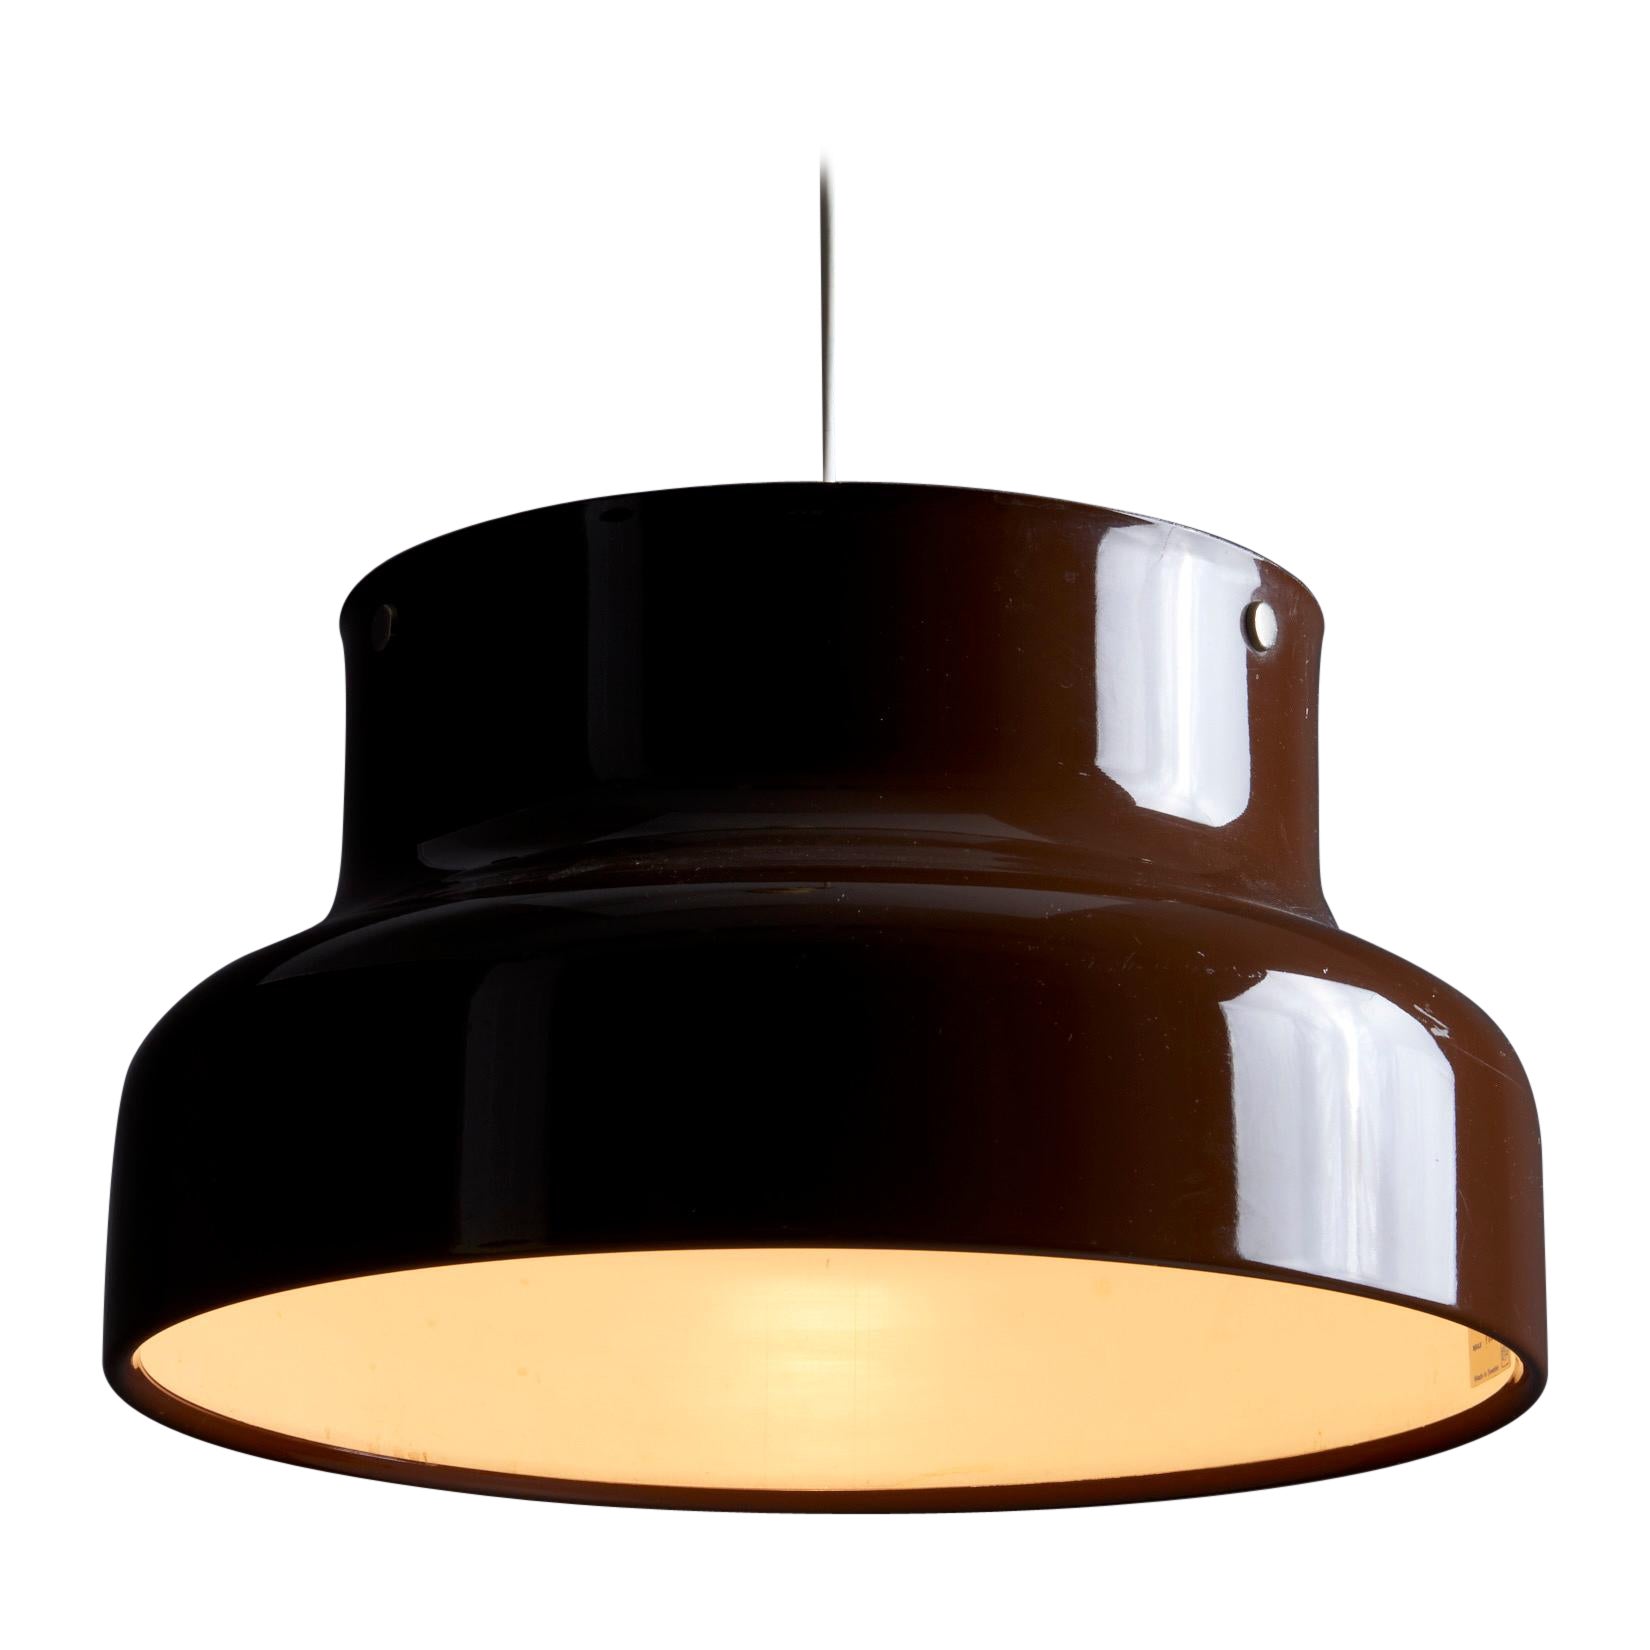 'Bumling' Pendant Lamp by Anders Pehrson for Ateljé Lyktan, Sweden 1968 For Sale